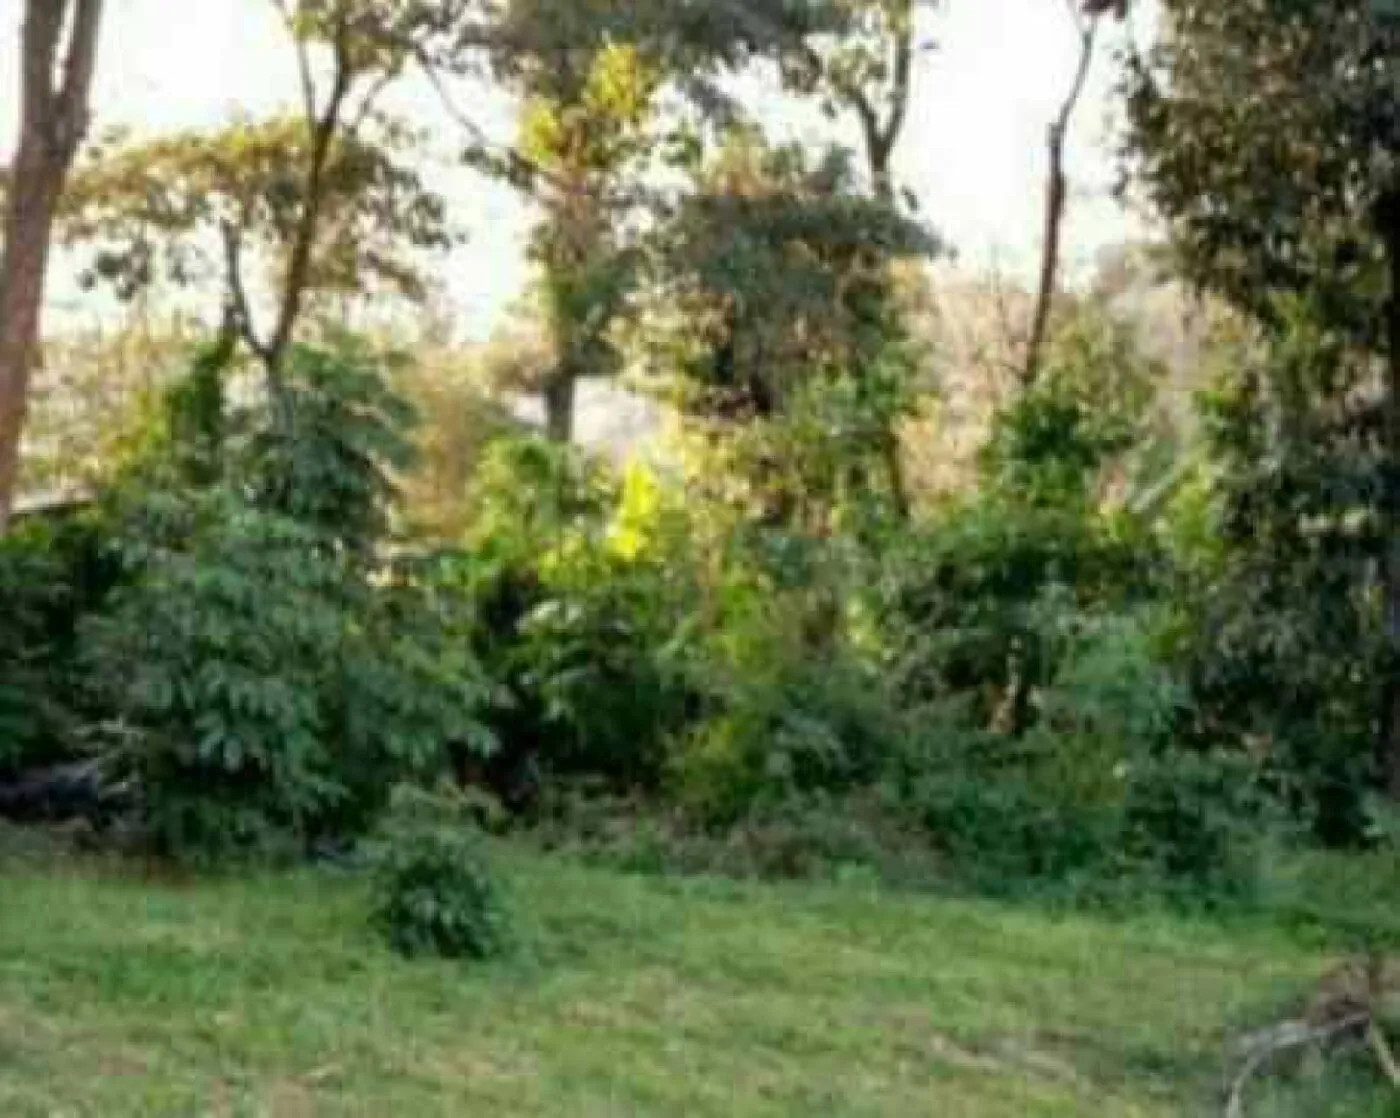 Land For Sale Real Estate-Land for sale in Karen Hardy 1/2 Acre @30M Ready Title Deed QUICK SALE Exclusive half acre 0.5🔥 5